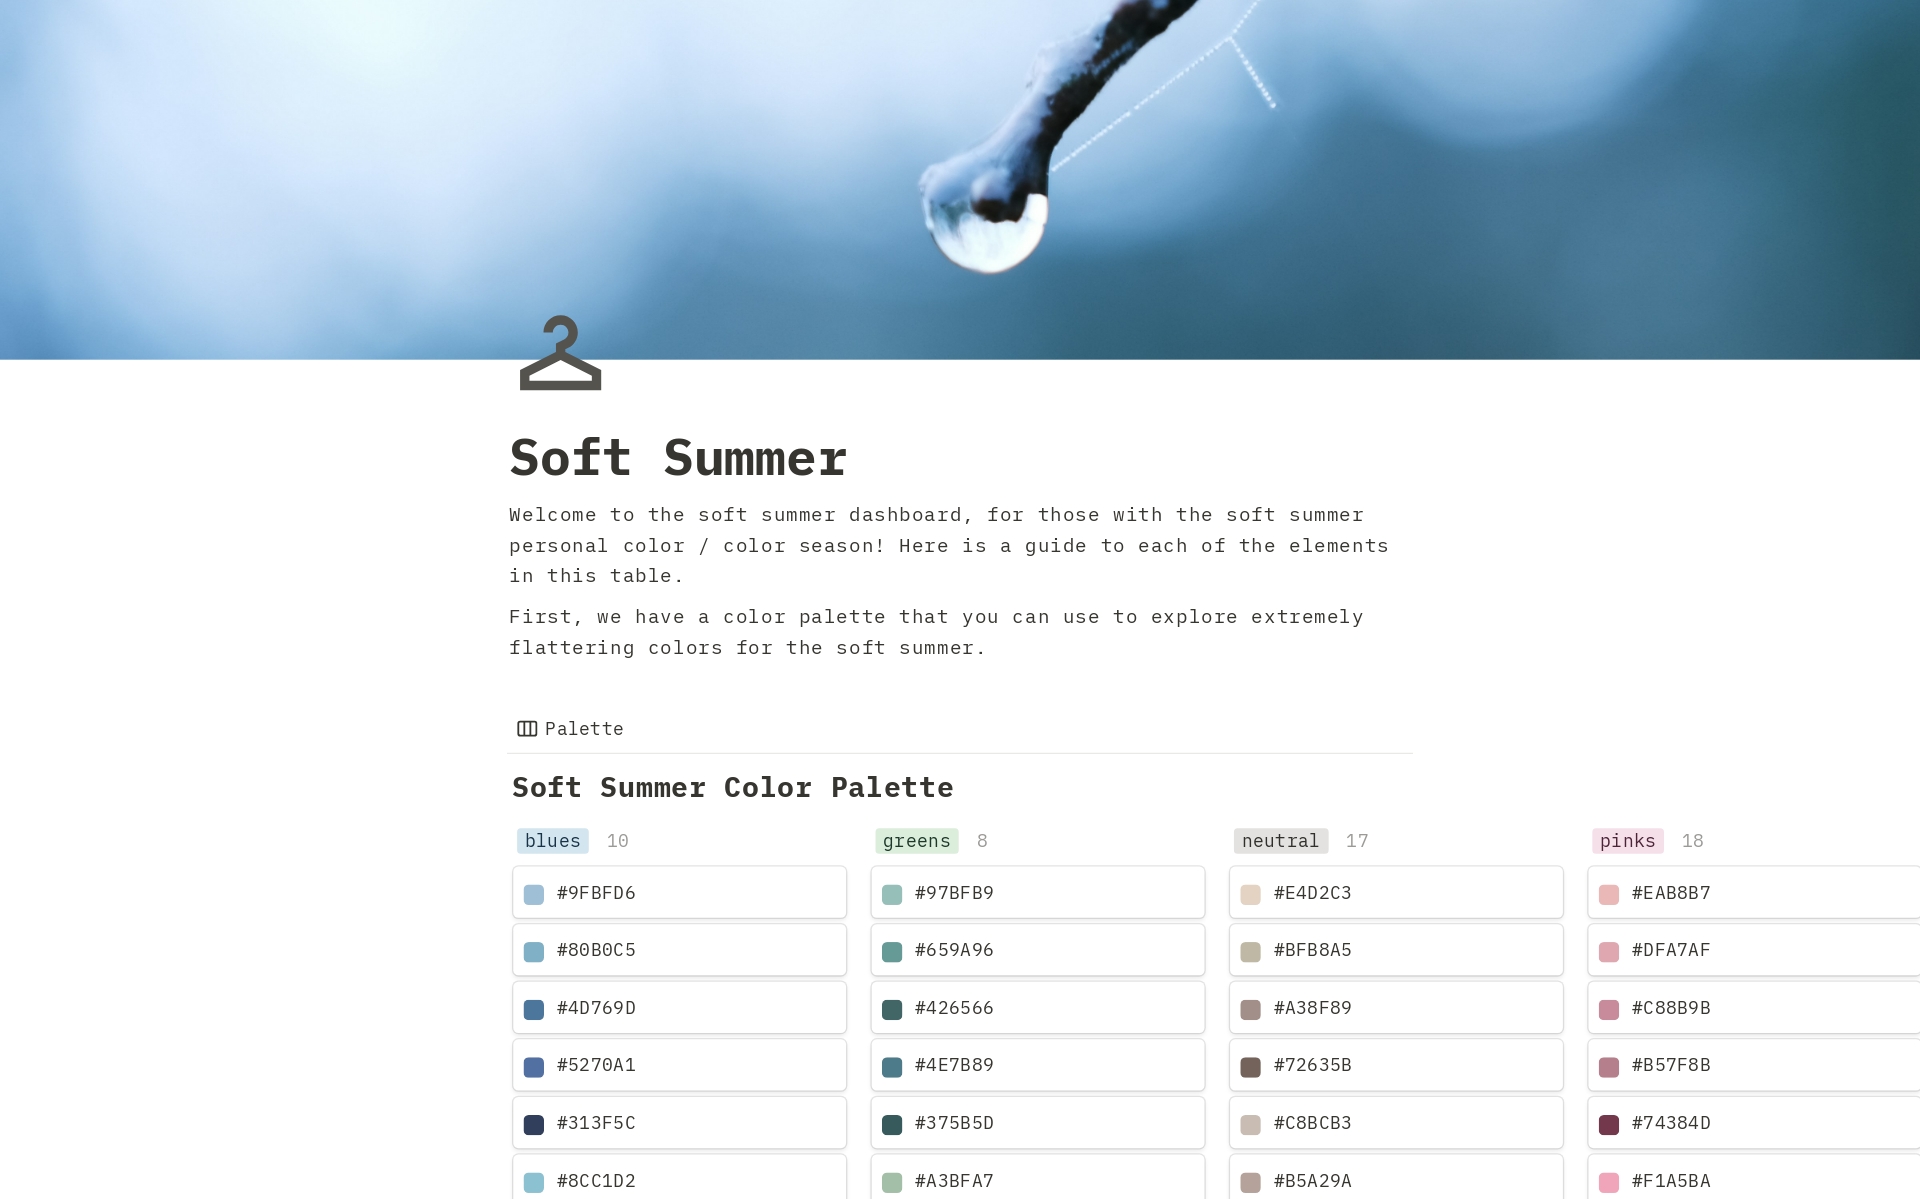 Are you a soft summer? Do you want to organize your wardrobe, makeup, and wishlists based on your most flattering colors? By using this template, you can curate your style to align with the soft summer color palette.